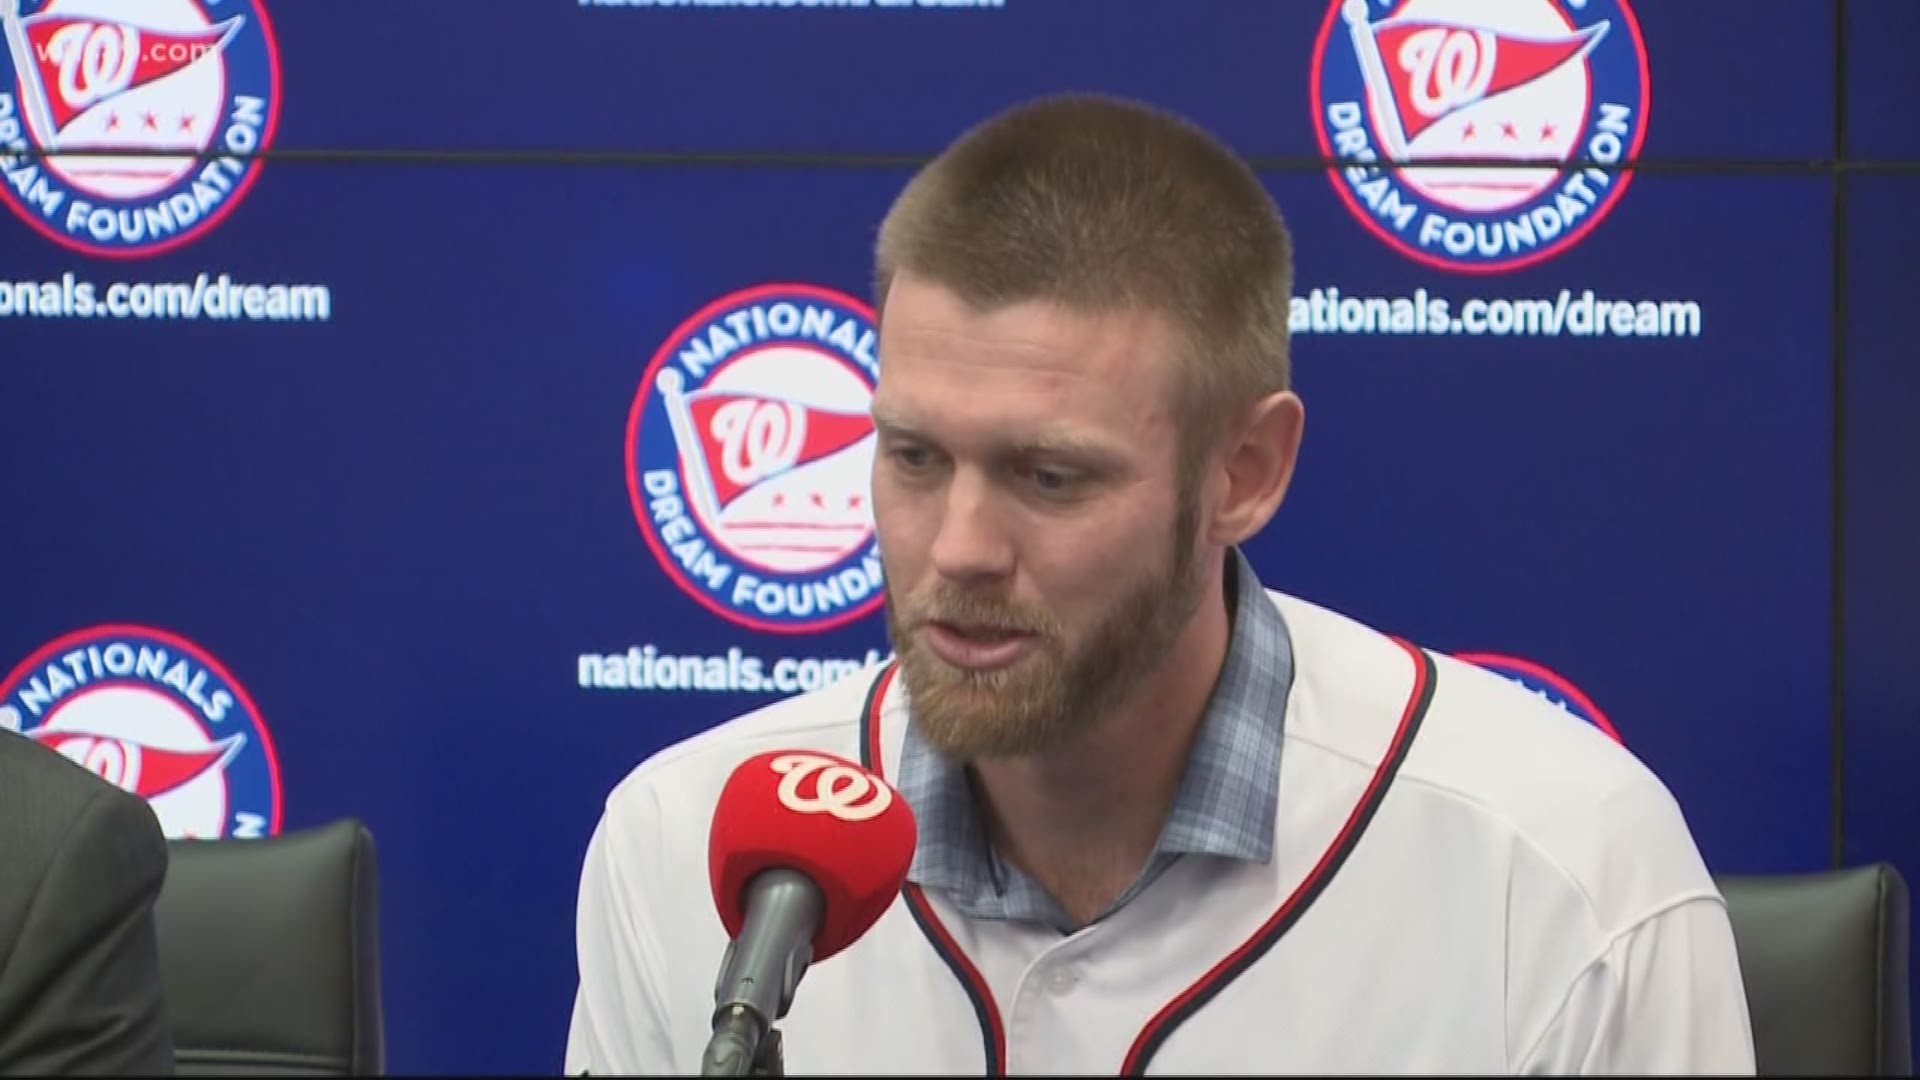 The World Series MVP told reporters today he plans to finish his career here in Washington.